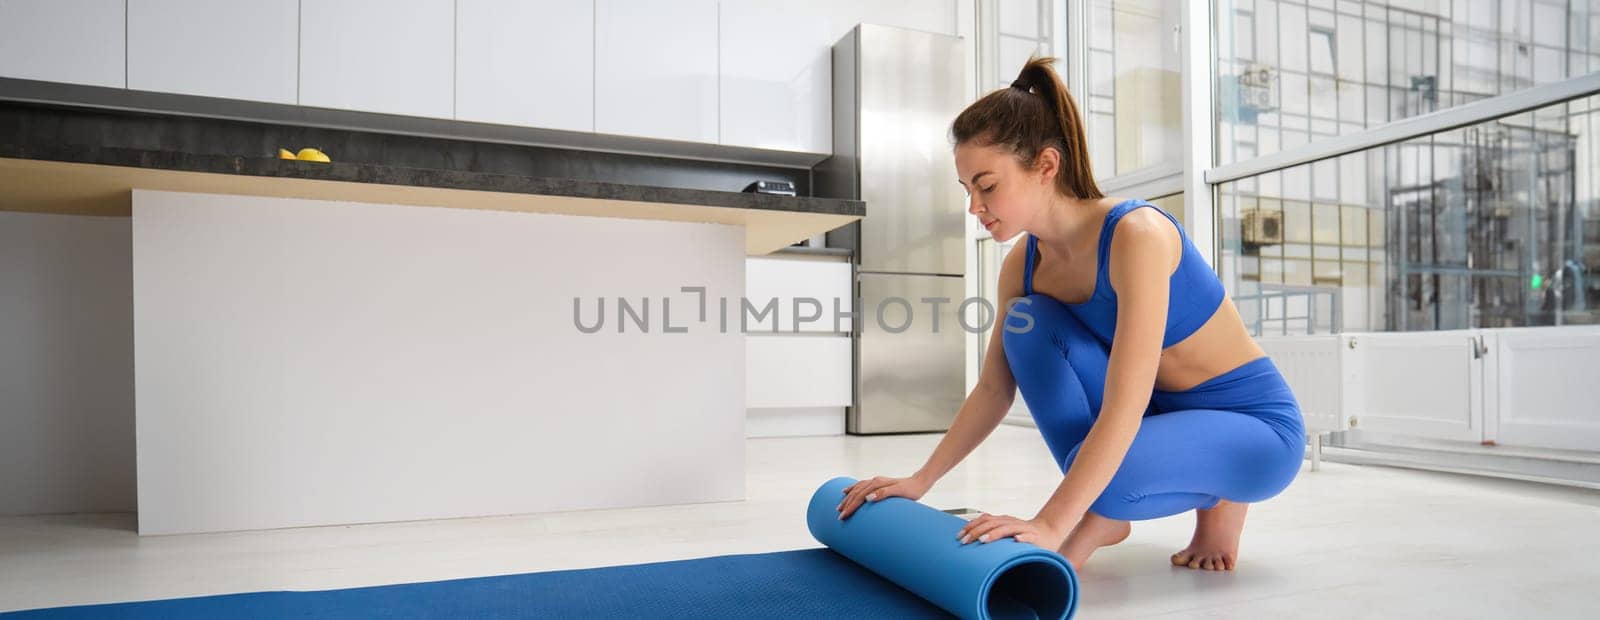 Image of young woman preparing living room for meditation, yoga exercises, unwrapping a mat on living room floor, wearing sportswear.